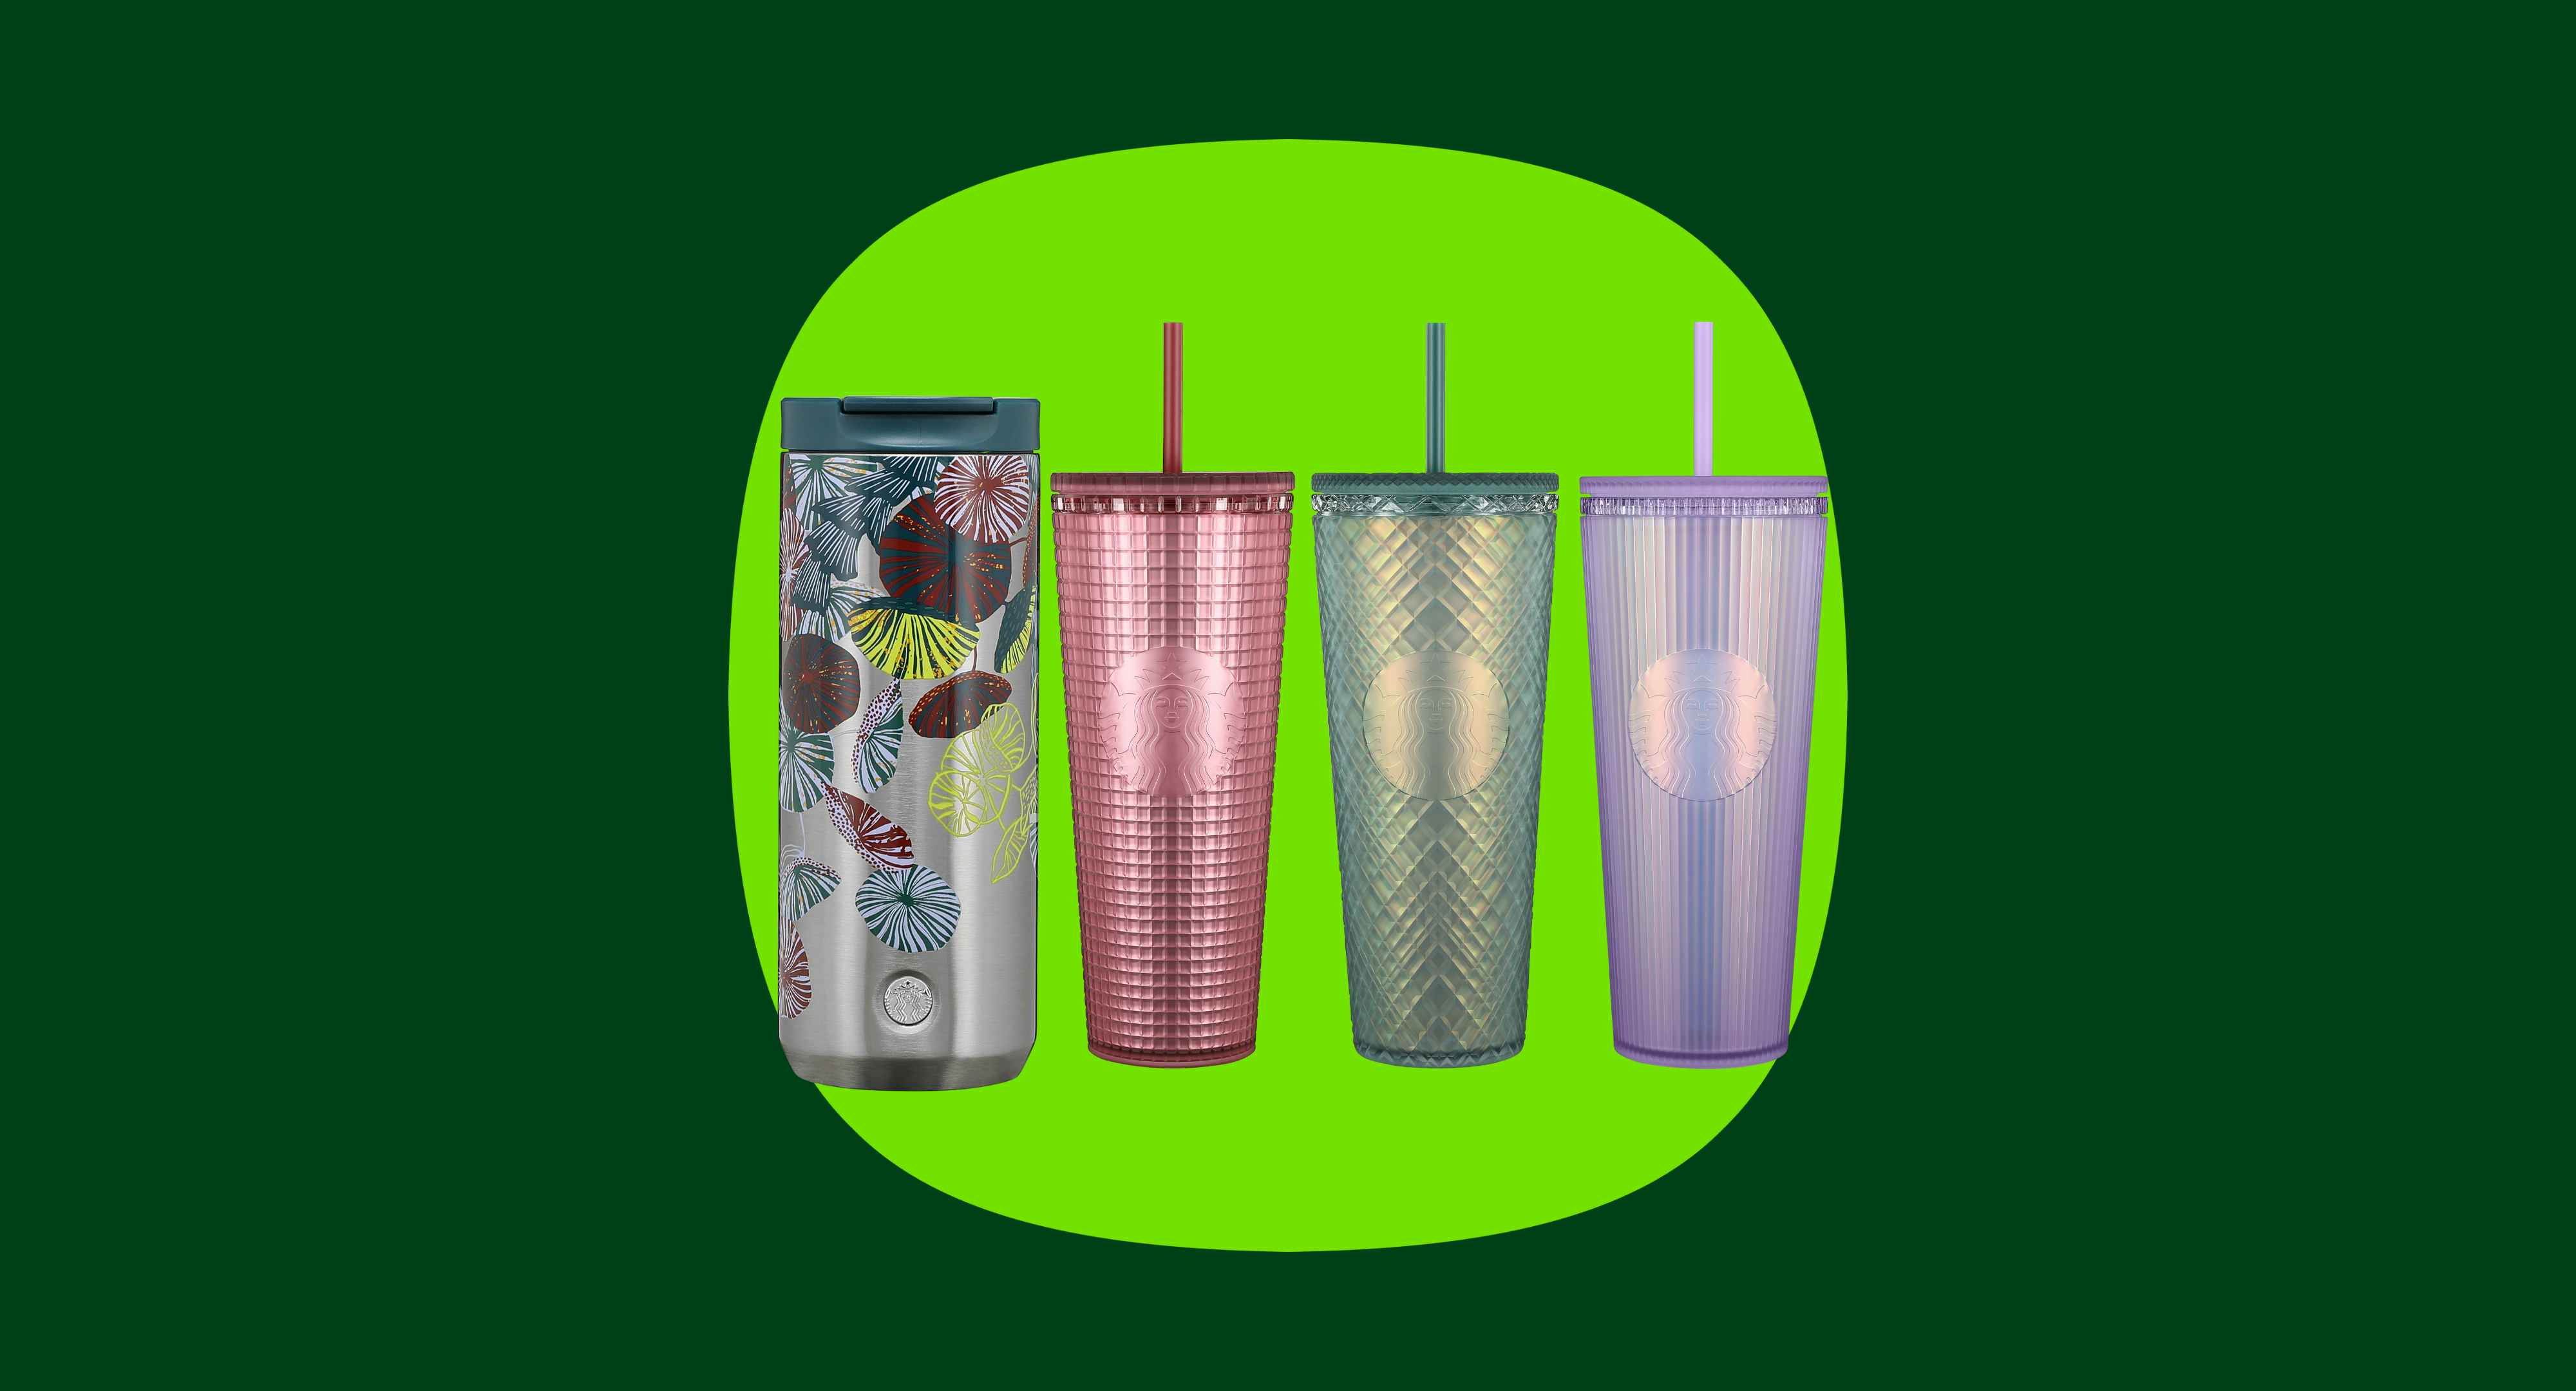 Starbucks' Winter 2023 Cups & Tumblers Are All About Pastels